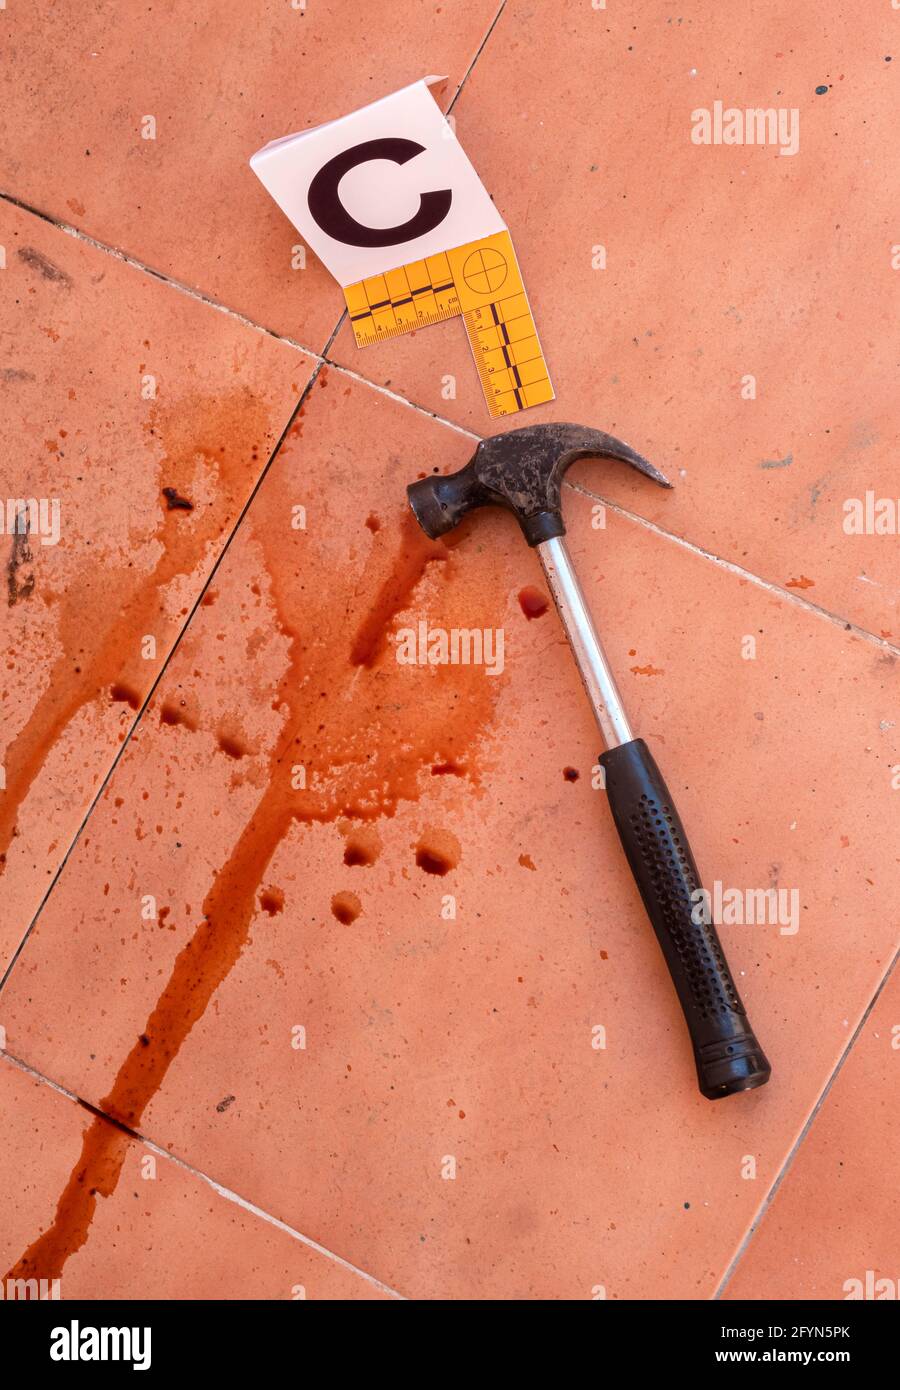 Bloody hammer on the ground marked with number, crime scene, conceptual image Stock Photo